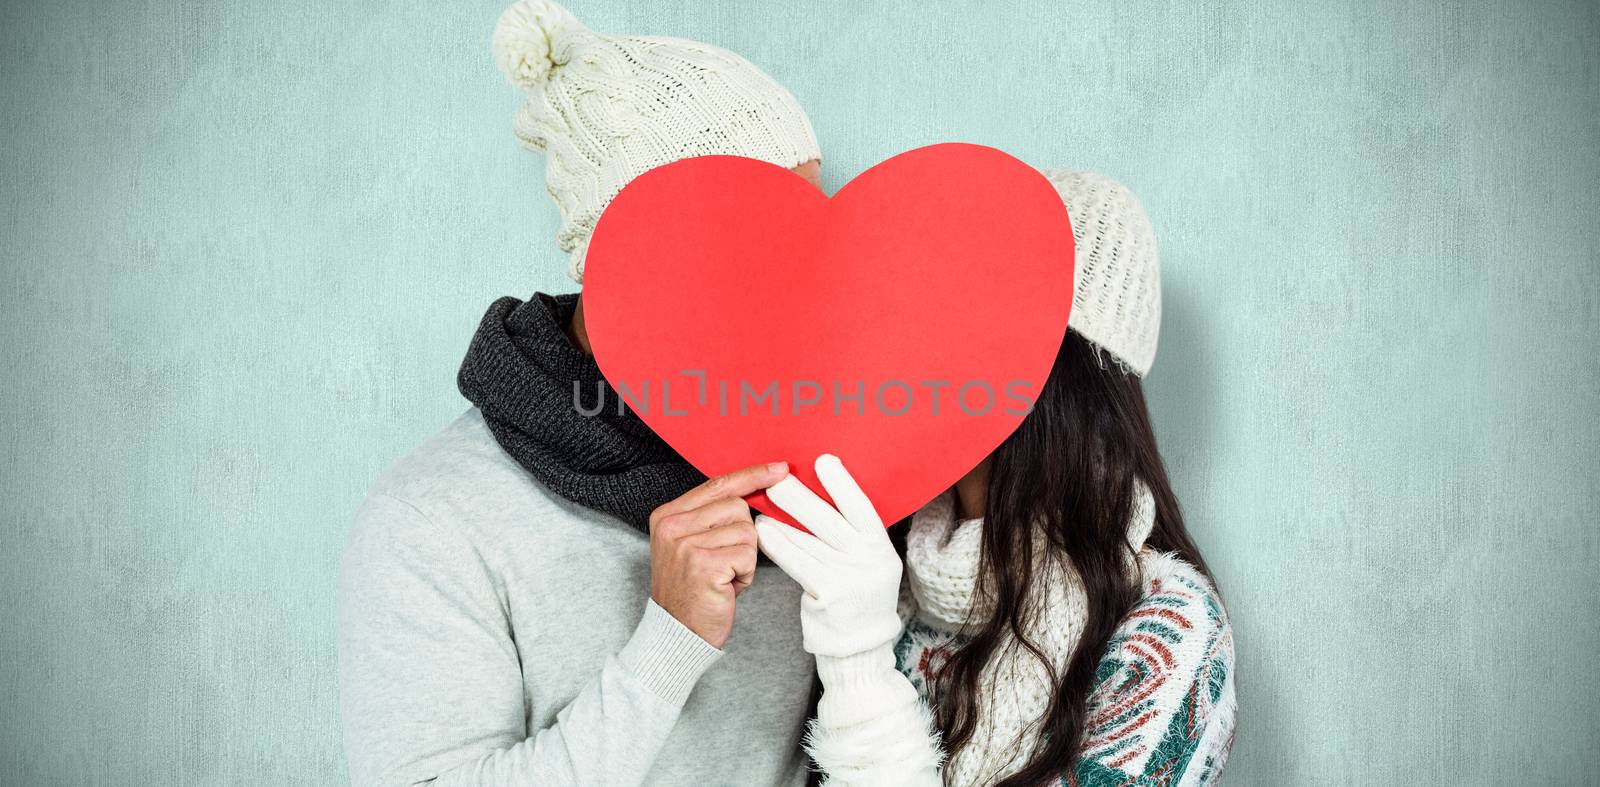 Smiling couple holding paper heart against blue background